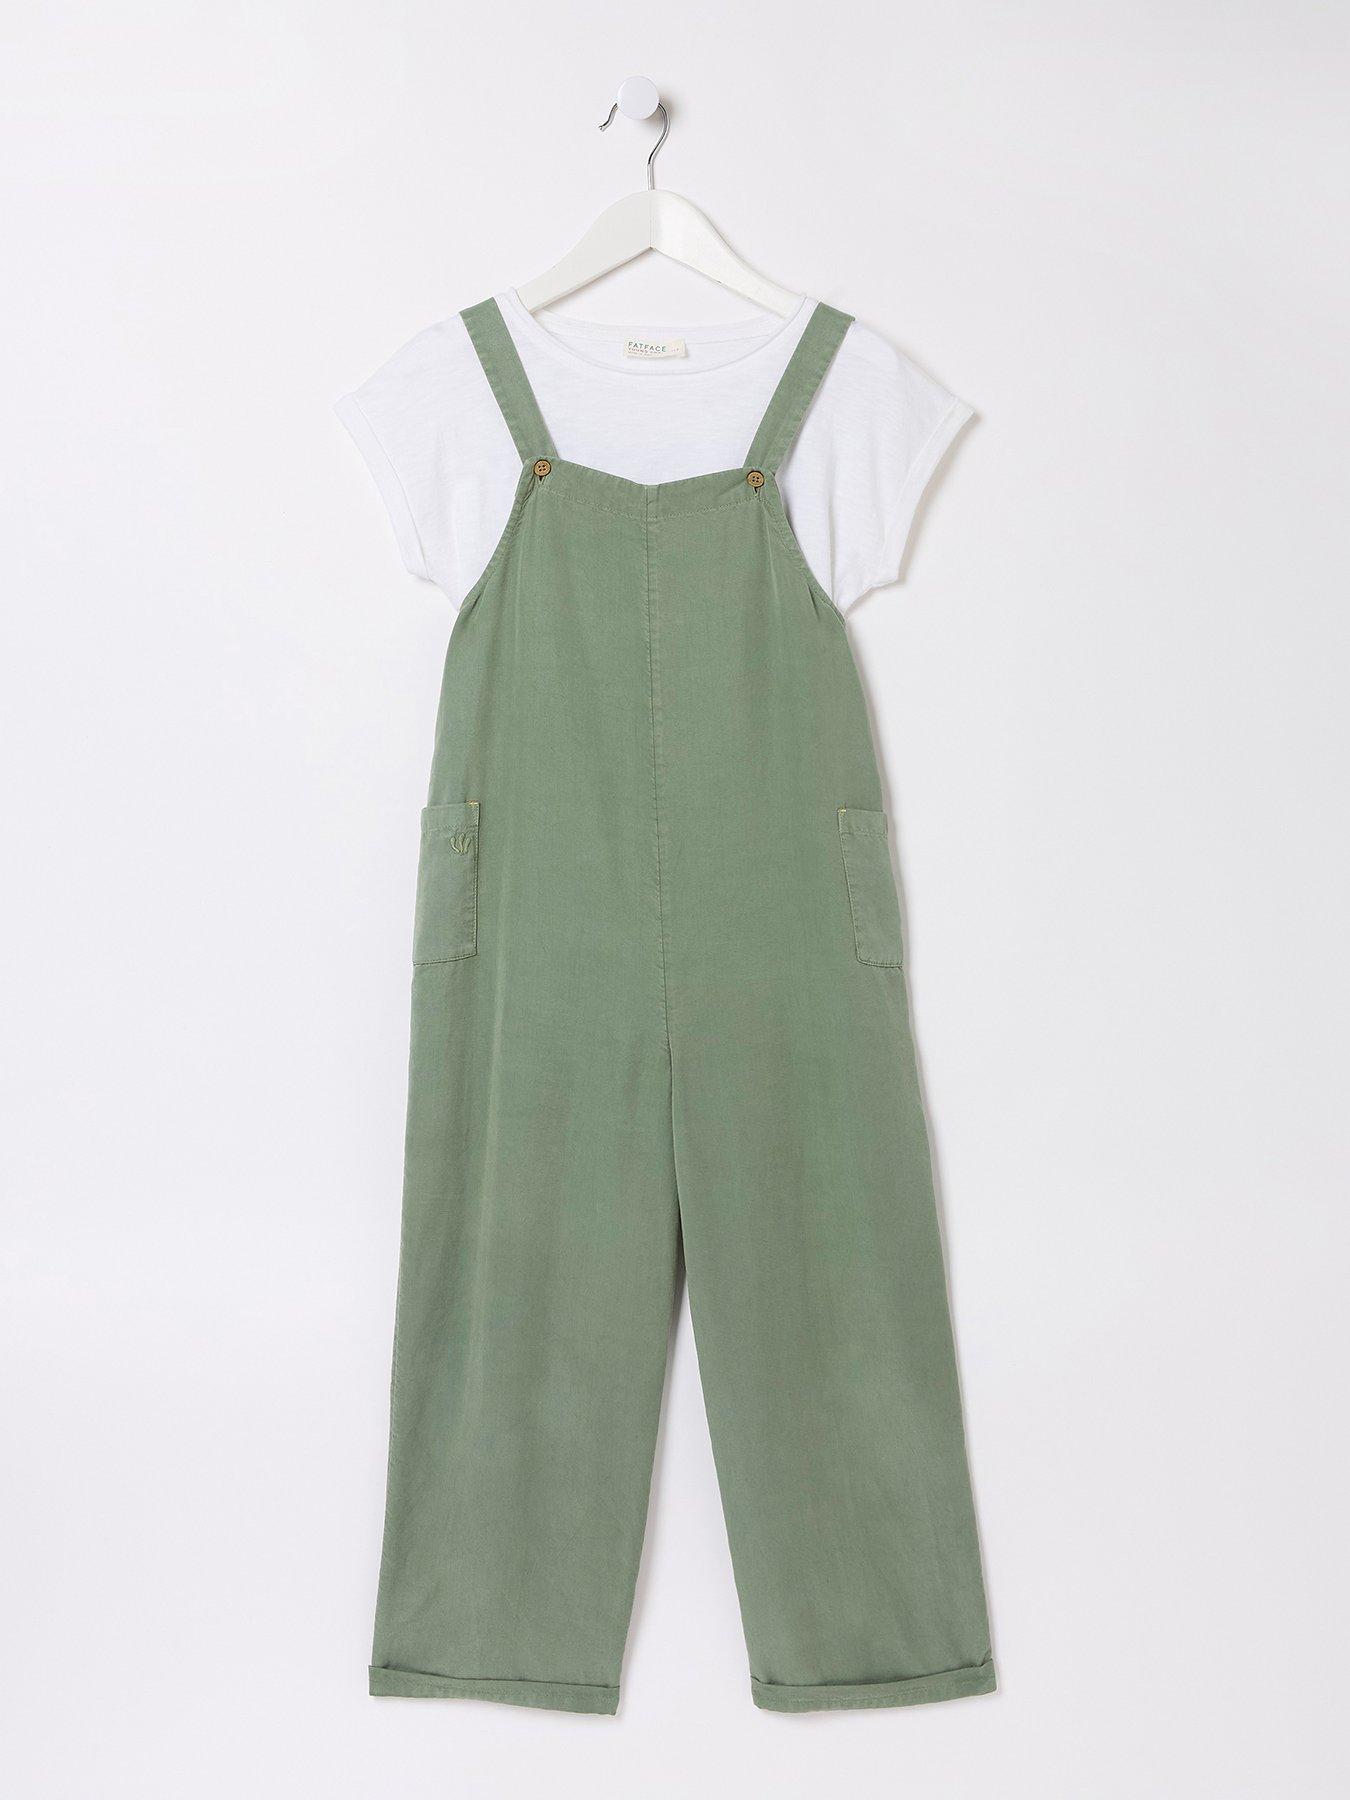 Levi's Wide Leg Cord Dungarees - Mole - Brown